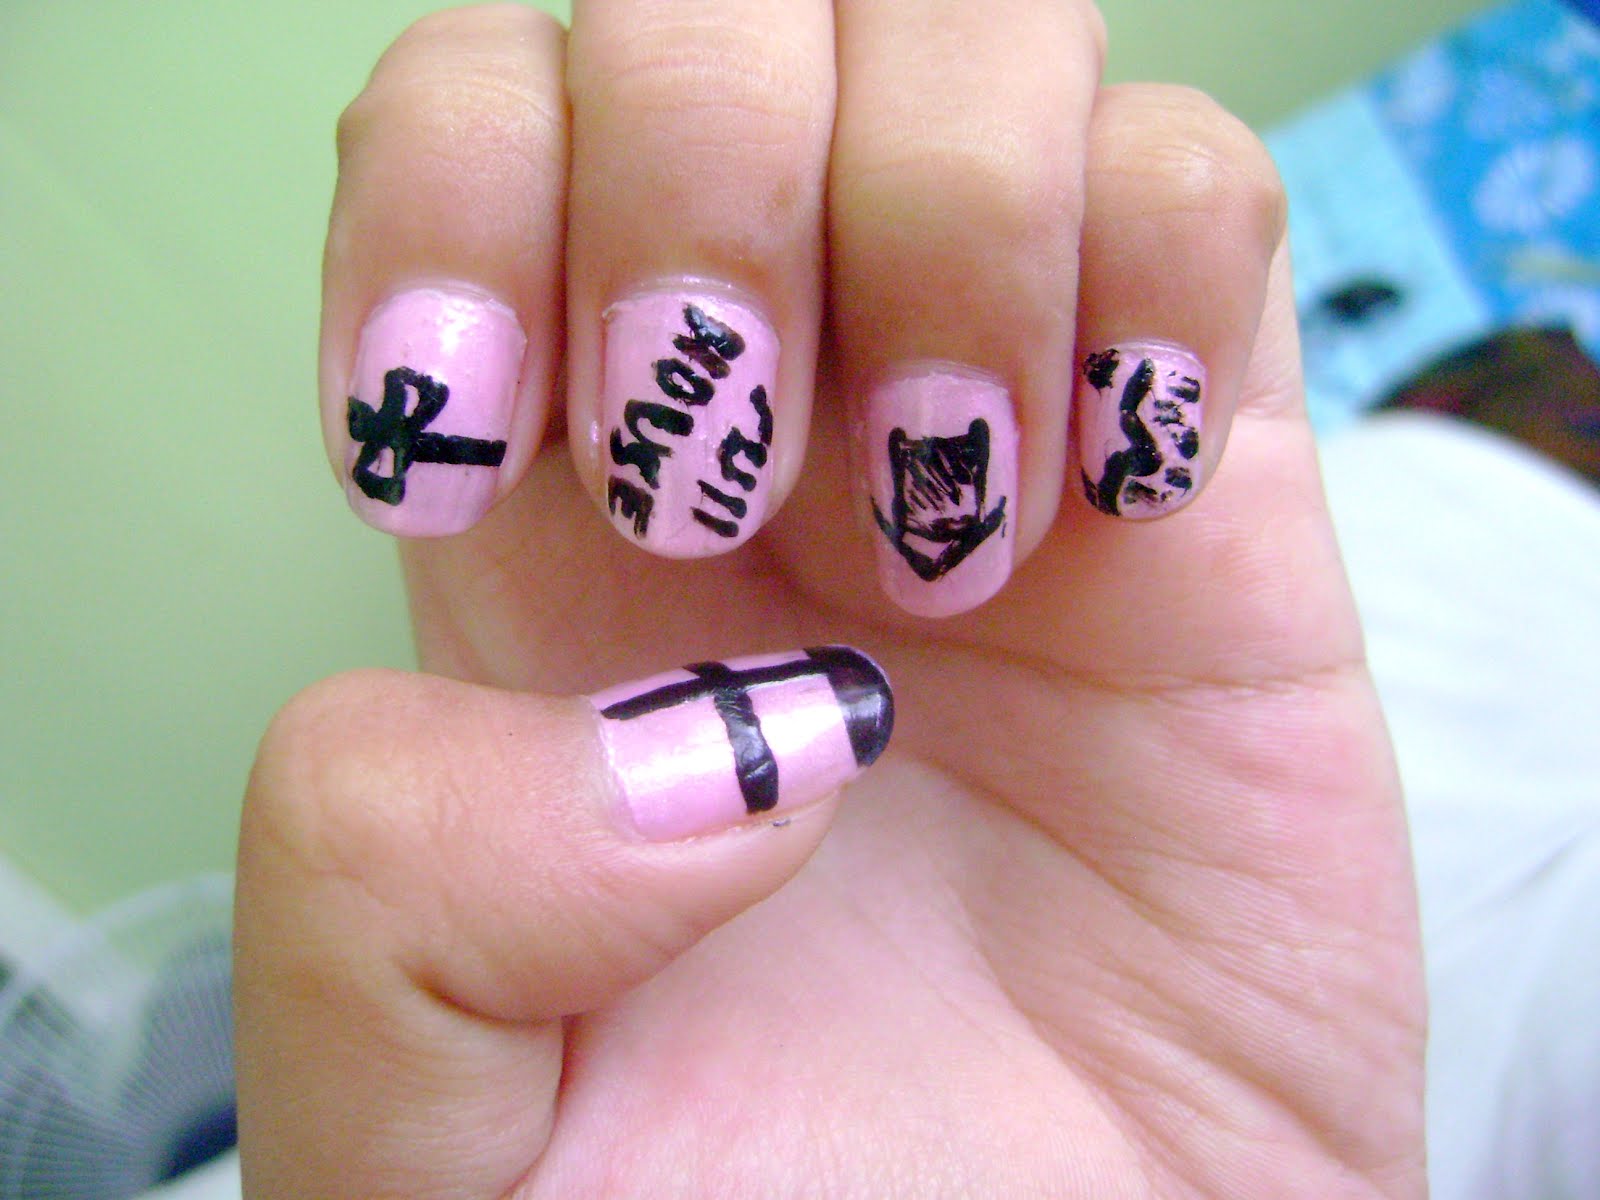 1. "The 10 Worst Nail Art Designs Ever Created" - wide 3